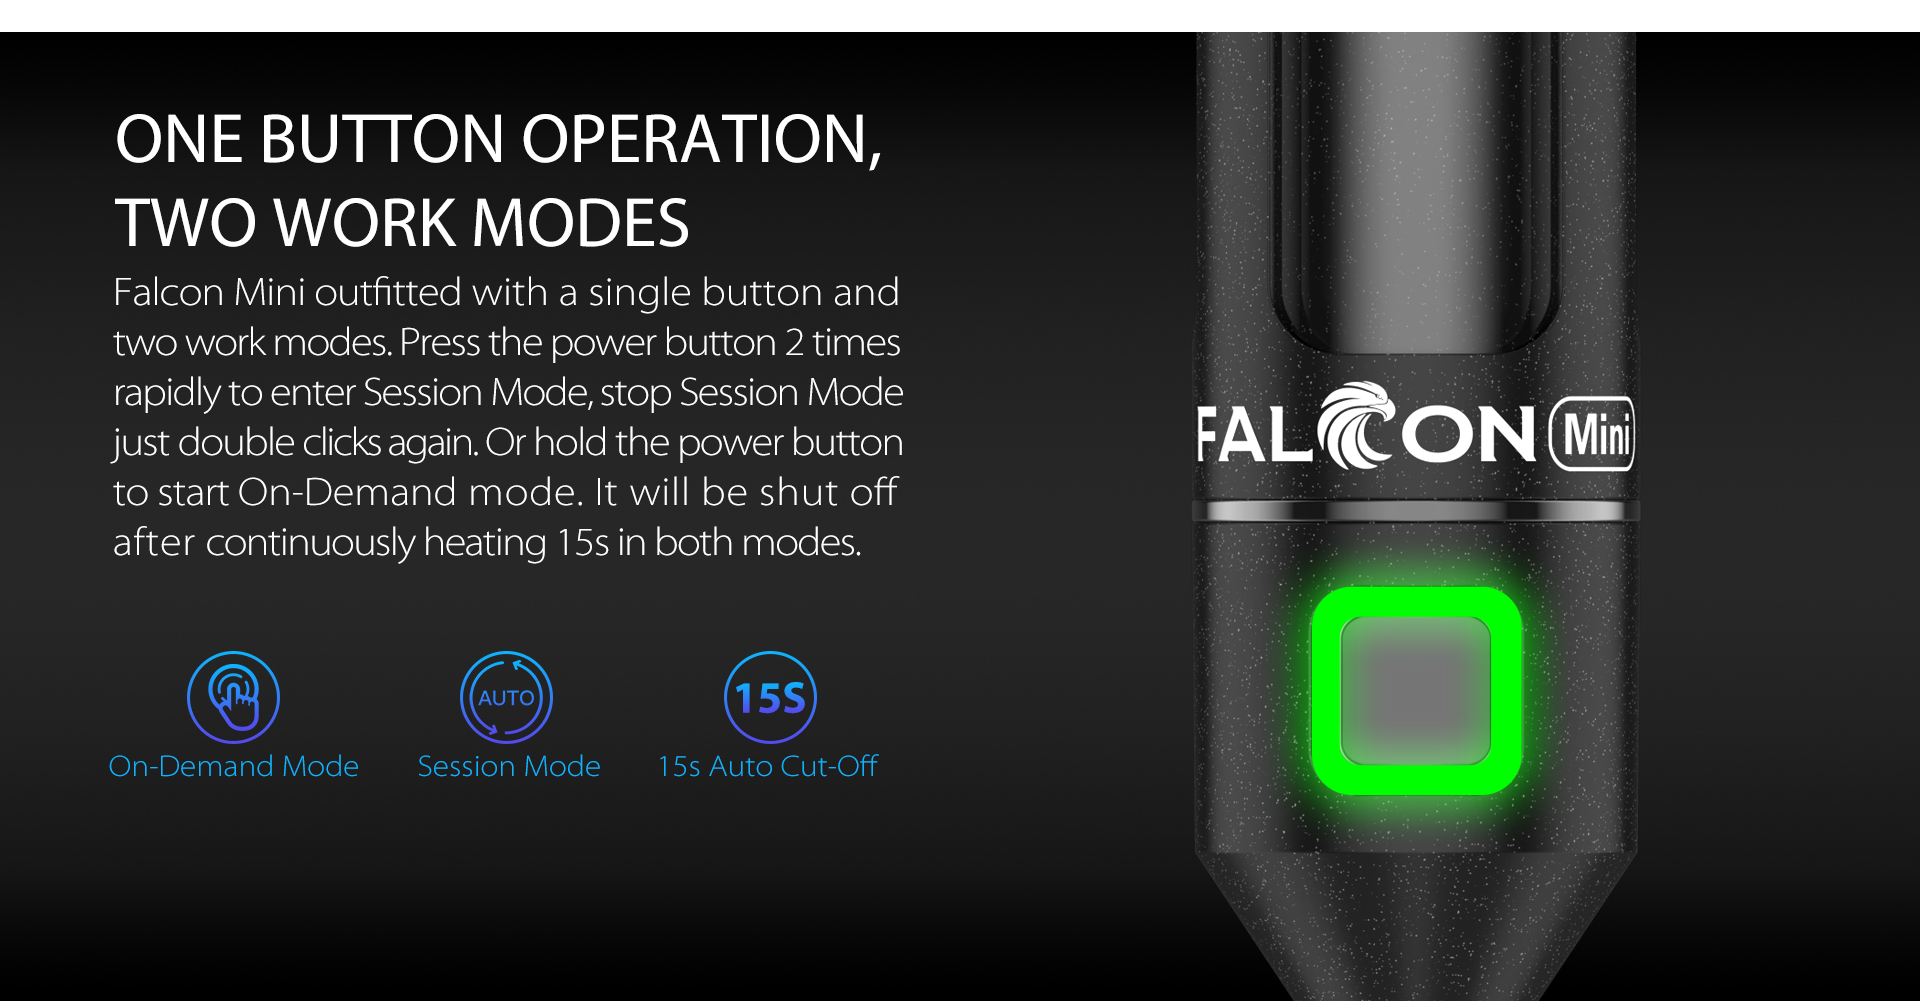 Yocan Falcon Mini Vaporizer Pen outfitted with 2 work modes.